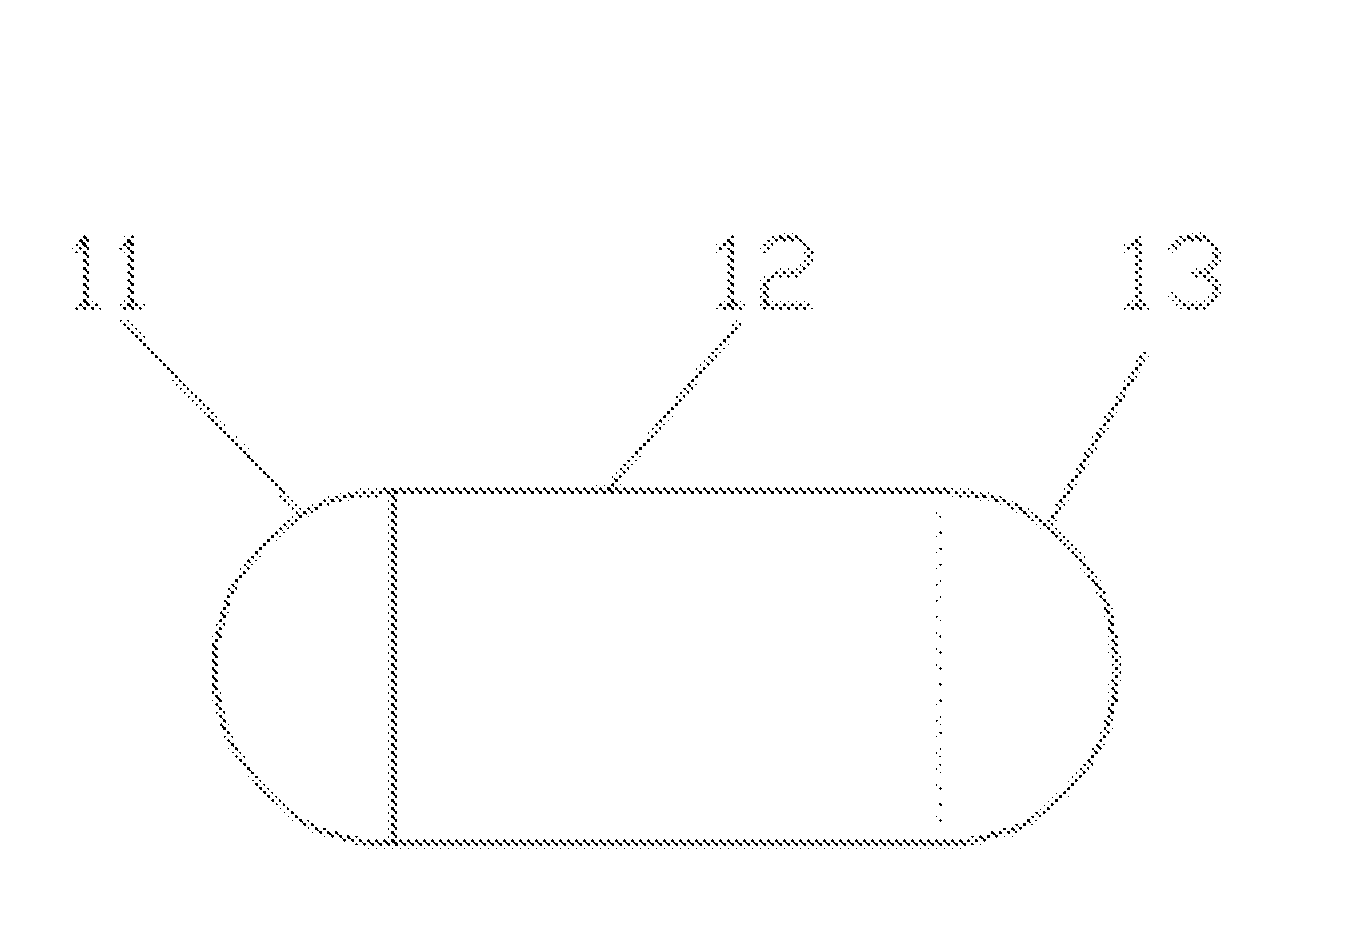 Capsule endoscope having a self-cleaning surface and method of using the same